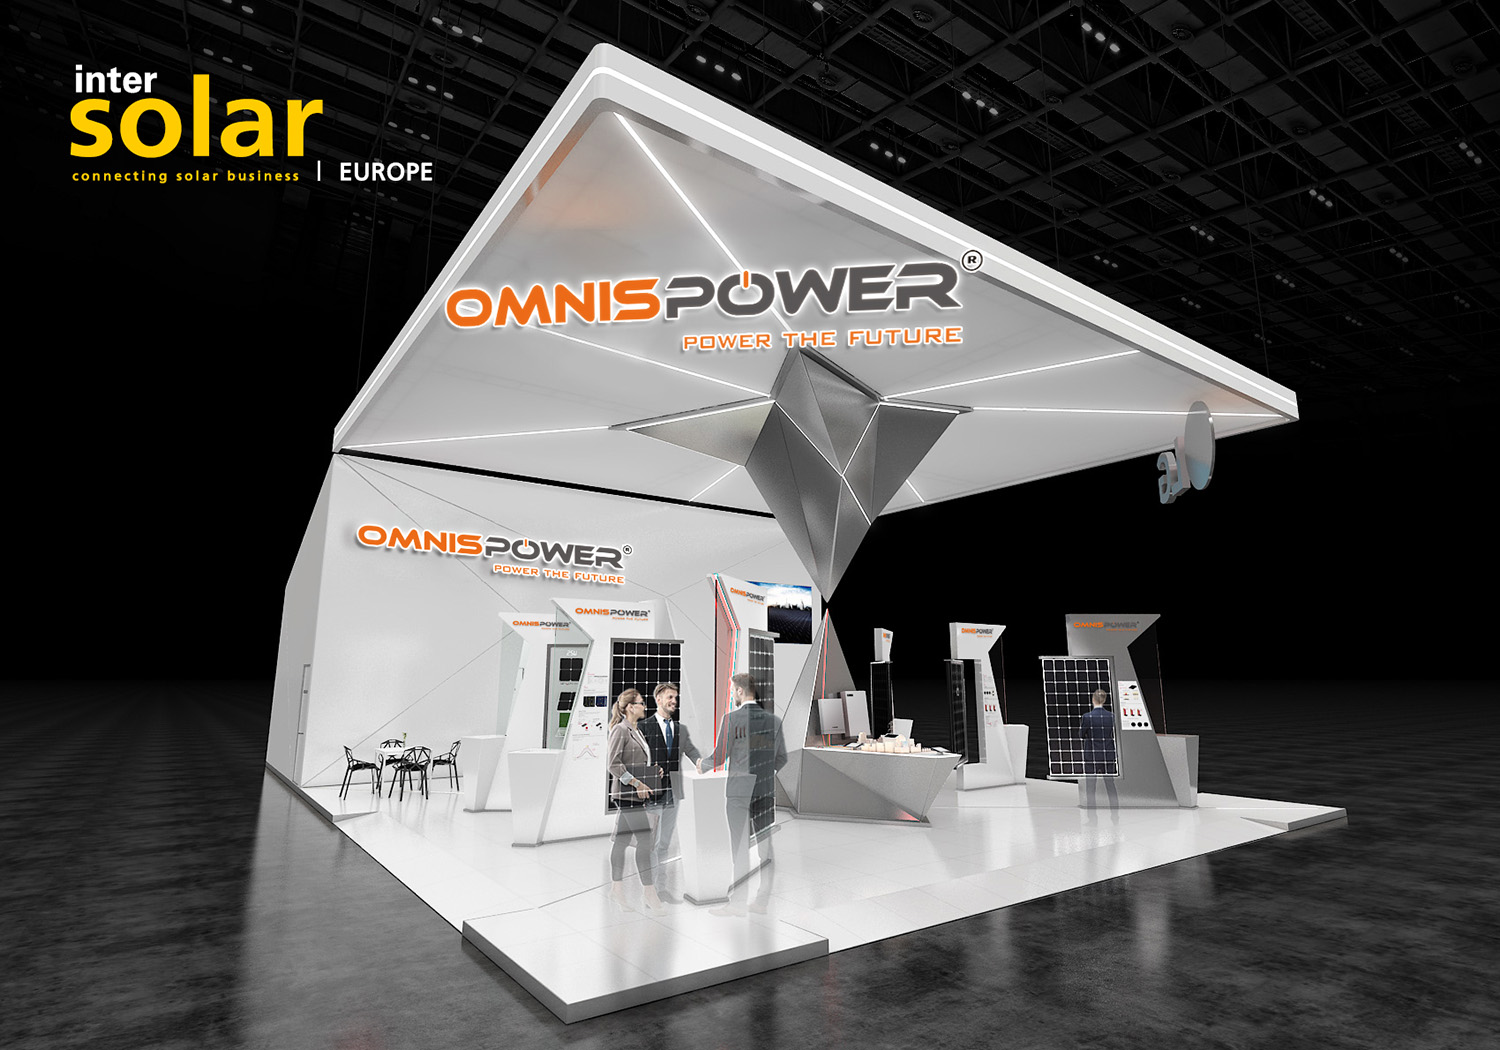 OMNIS POWER WILL SHOW UP WITH INTERSOLAR EUROPE 2019 IN MUNICH.